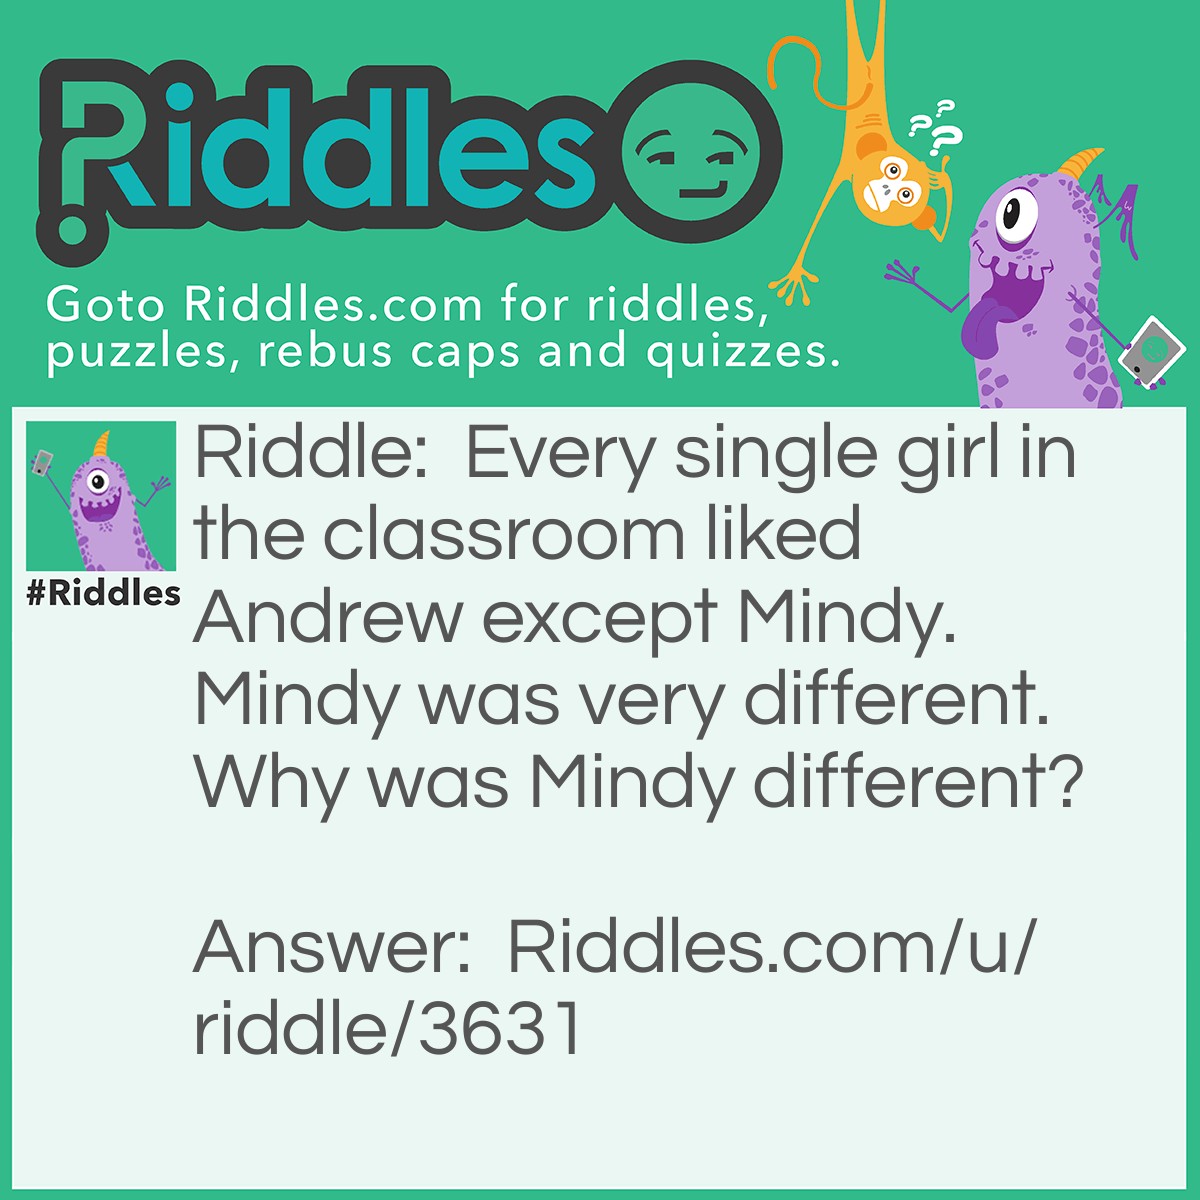 Riddle: Every single girl in the classroom liked Andrew except Mindy. Mindy was very different. Why was Mindy different? Answer: Because Mindy LOVES Andrew and is not single.